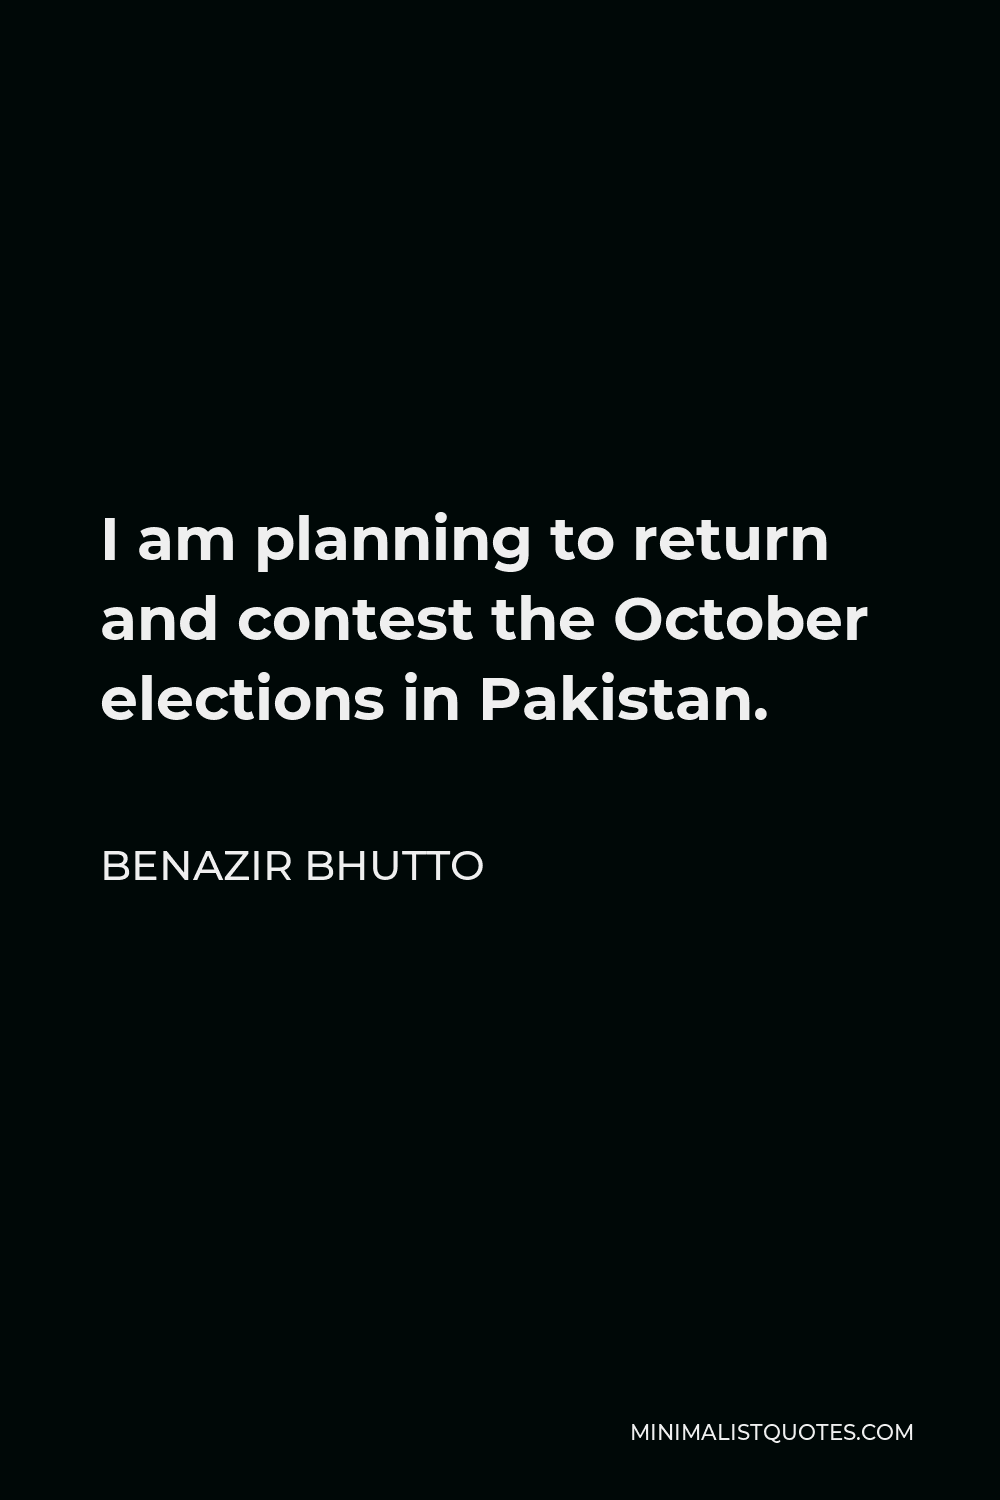 Benazir Bhutto Quote - I am planning to return and contest the October elections in Pakistan.